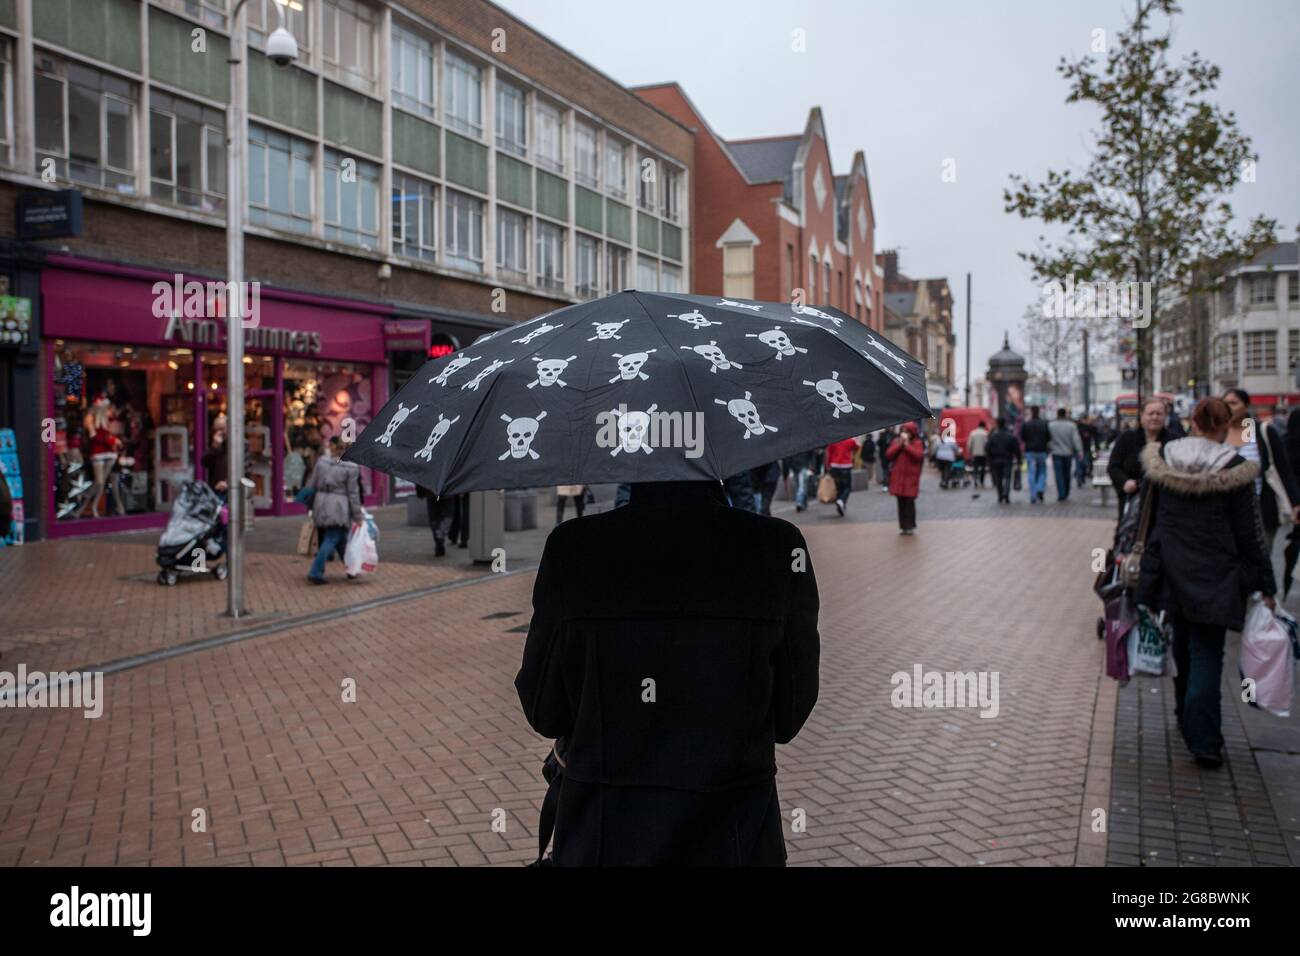 A woman walking down the high street holding an umbrella with 'Skull & Crossbones' print, as the retail sector struggles with the economy, Croydon, UK Stock Photo